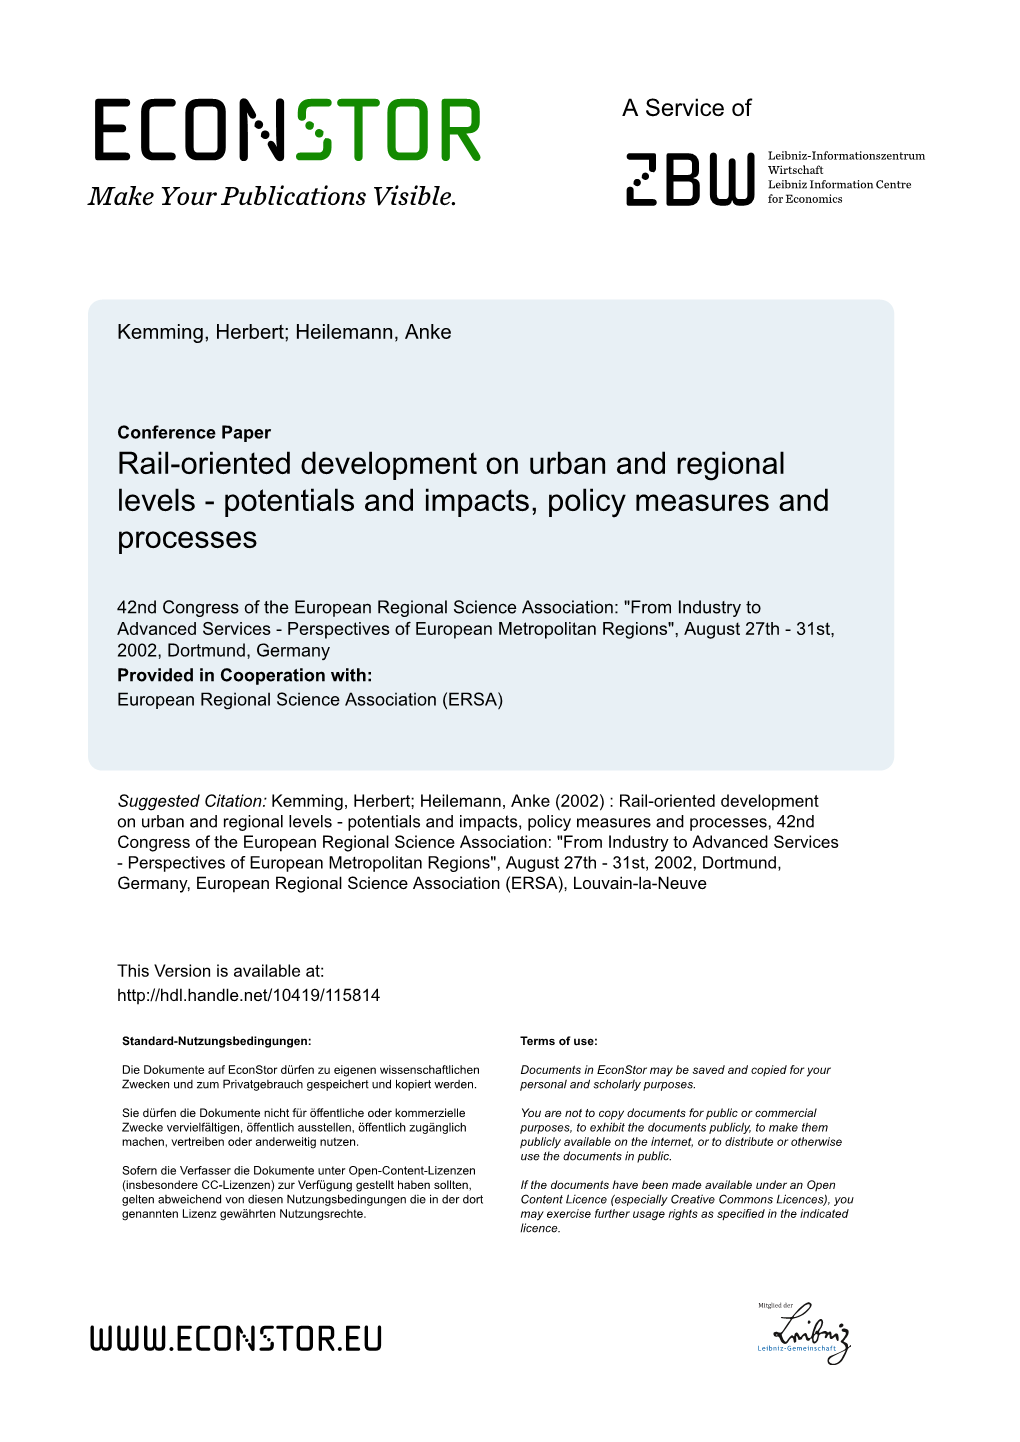 Rail-Oriented Development on Urban and Regional Levels - Potentials and Impacts, Policy Measures and Processes